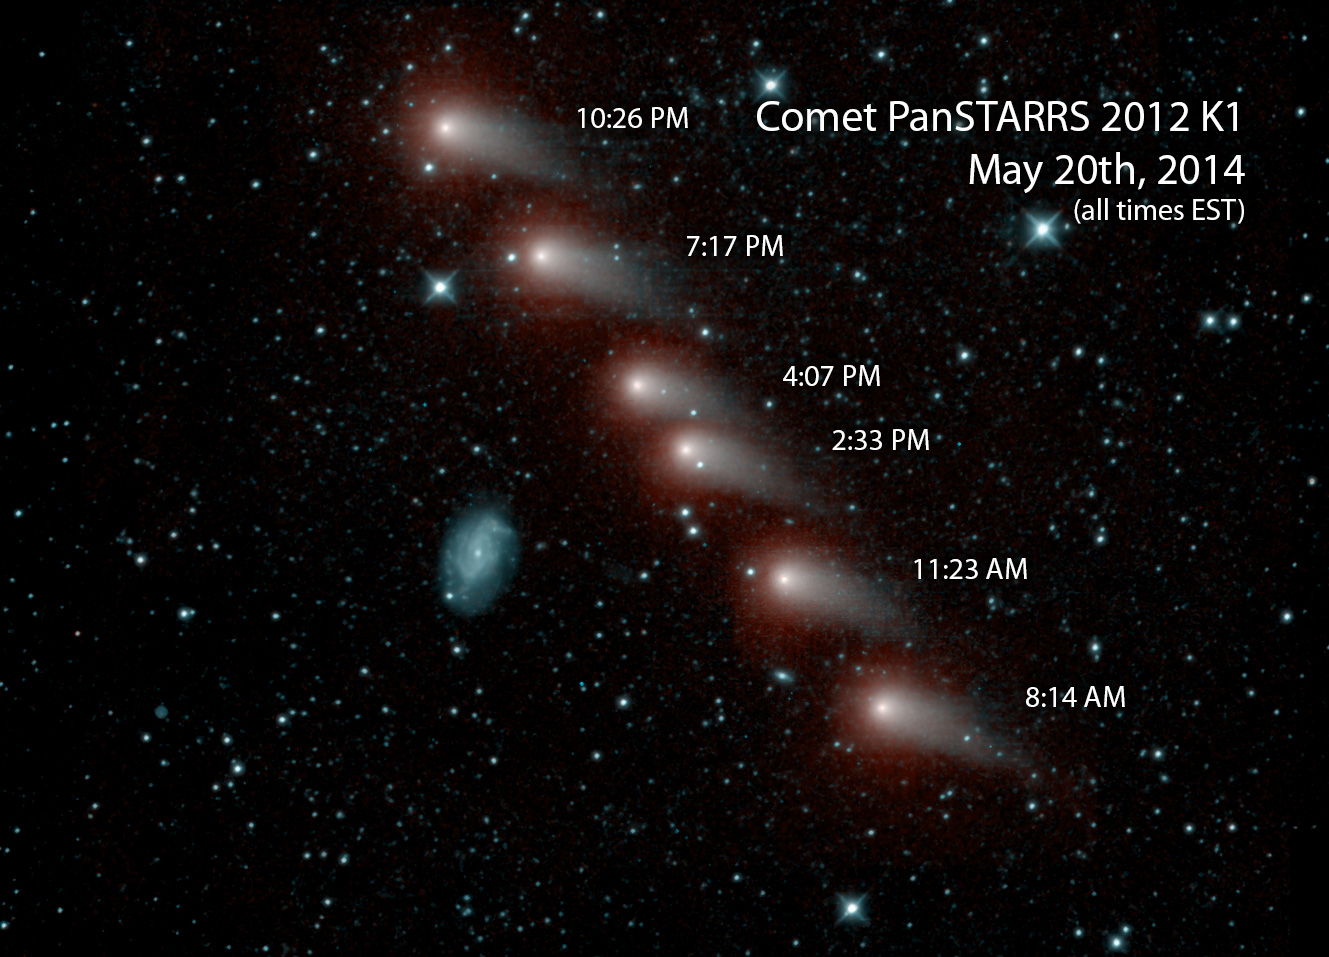 NASA’s NEOWISE mission spies K1 PanSTARRS